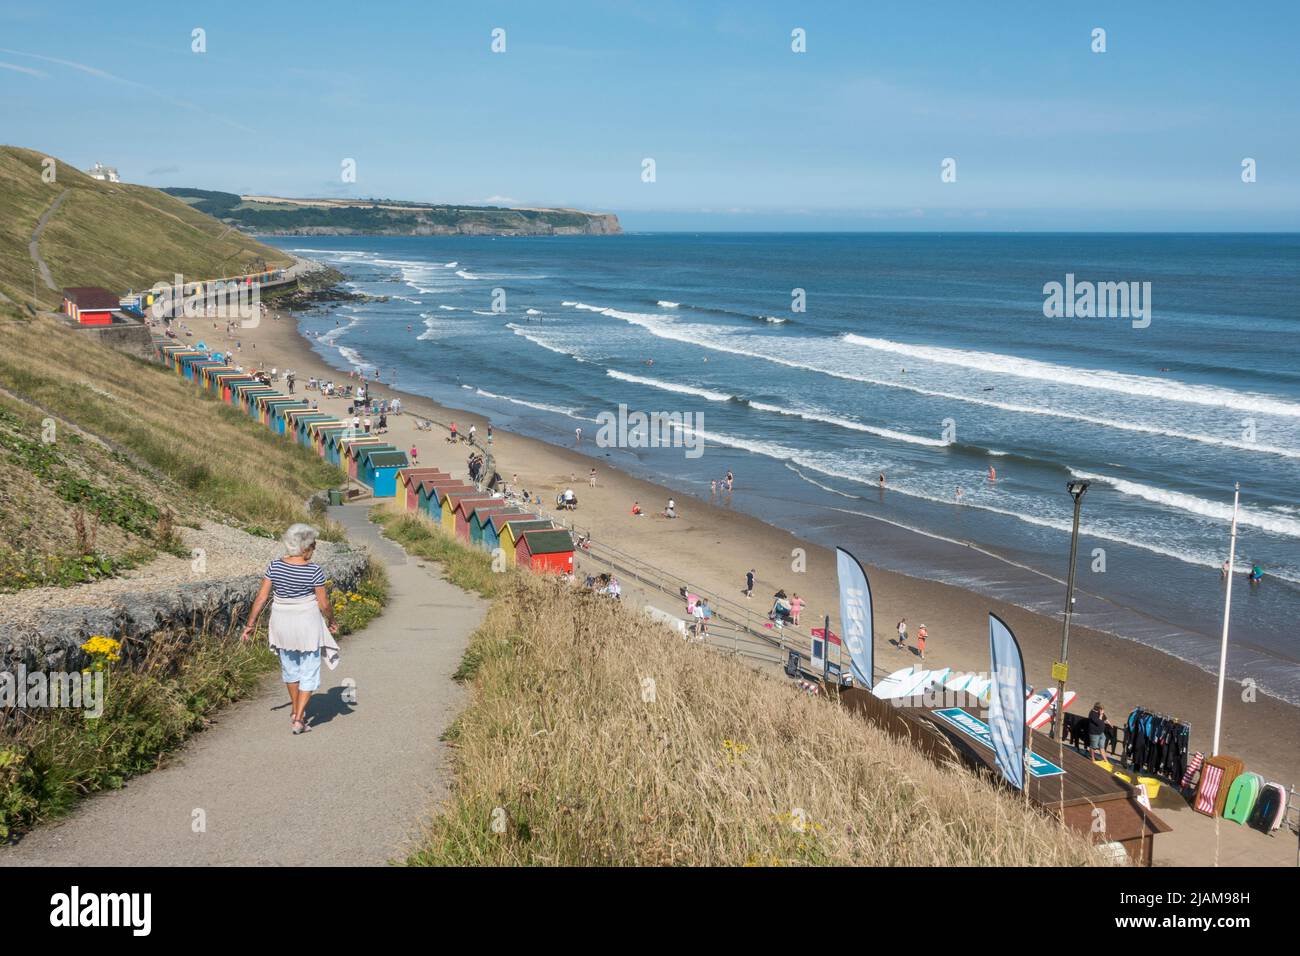 Farbenfrohe Whitby Beach Huts am Meer in Whitby, North Yorkshire, Großbritannien. Stockfoto